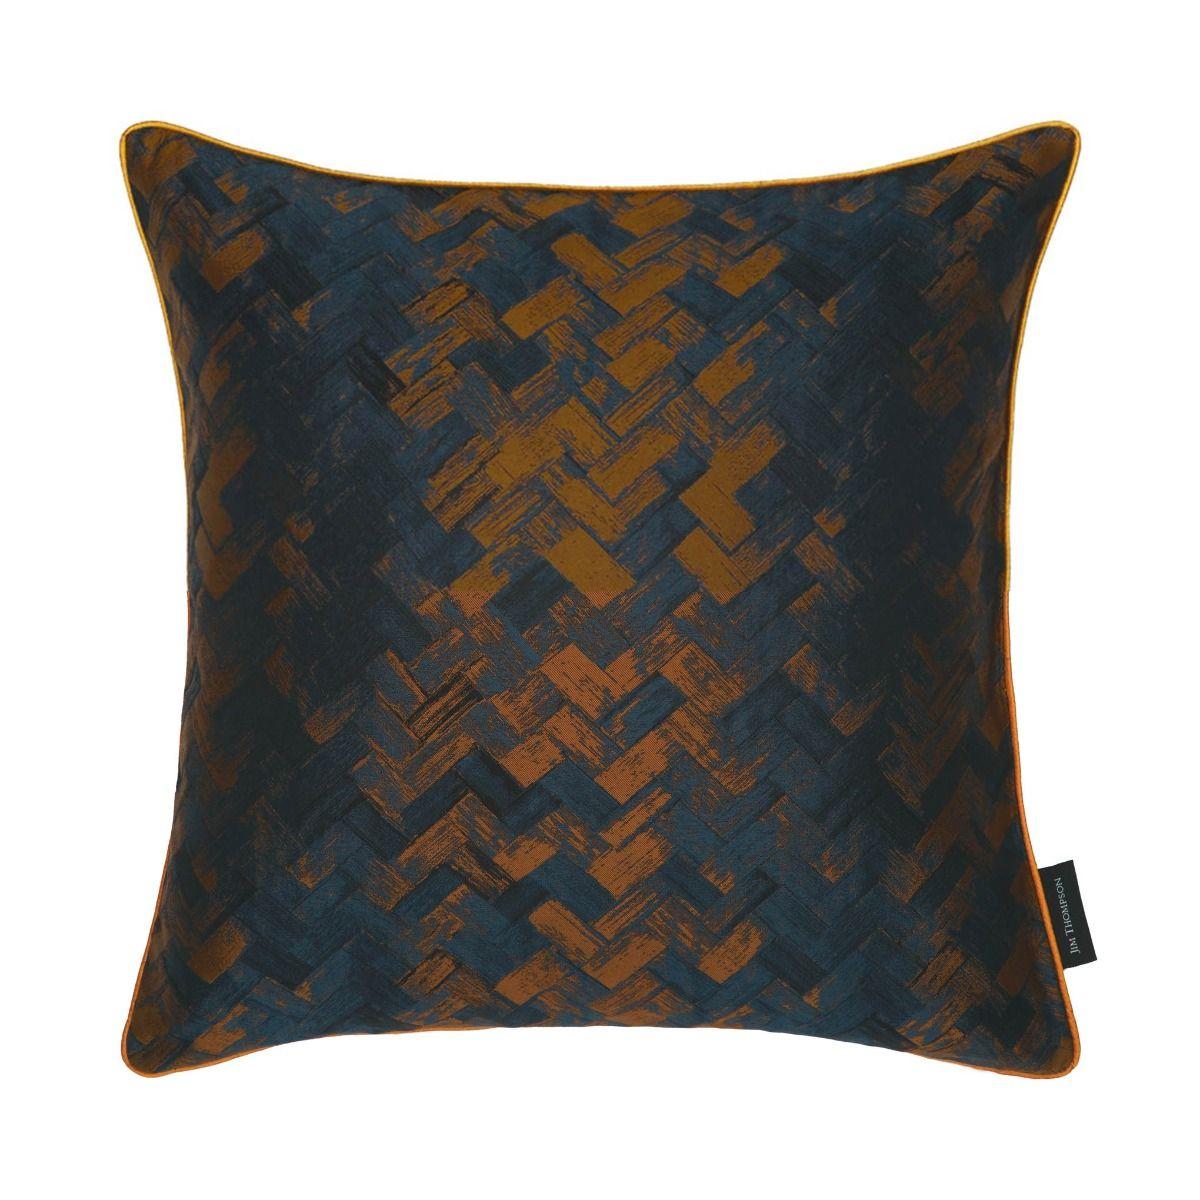 Tapienthong Camel Woven Cushion Cover 18" - Navy